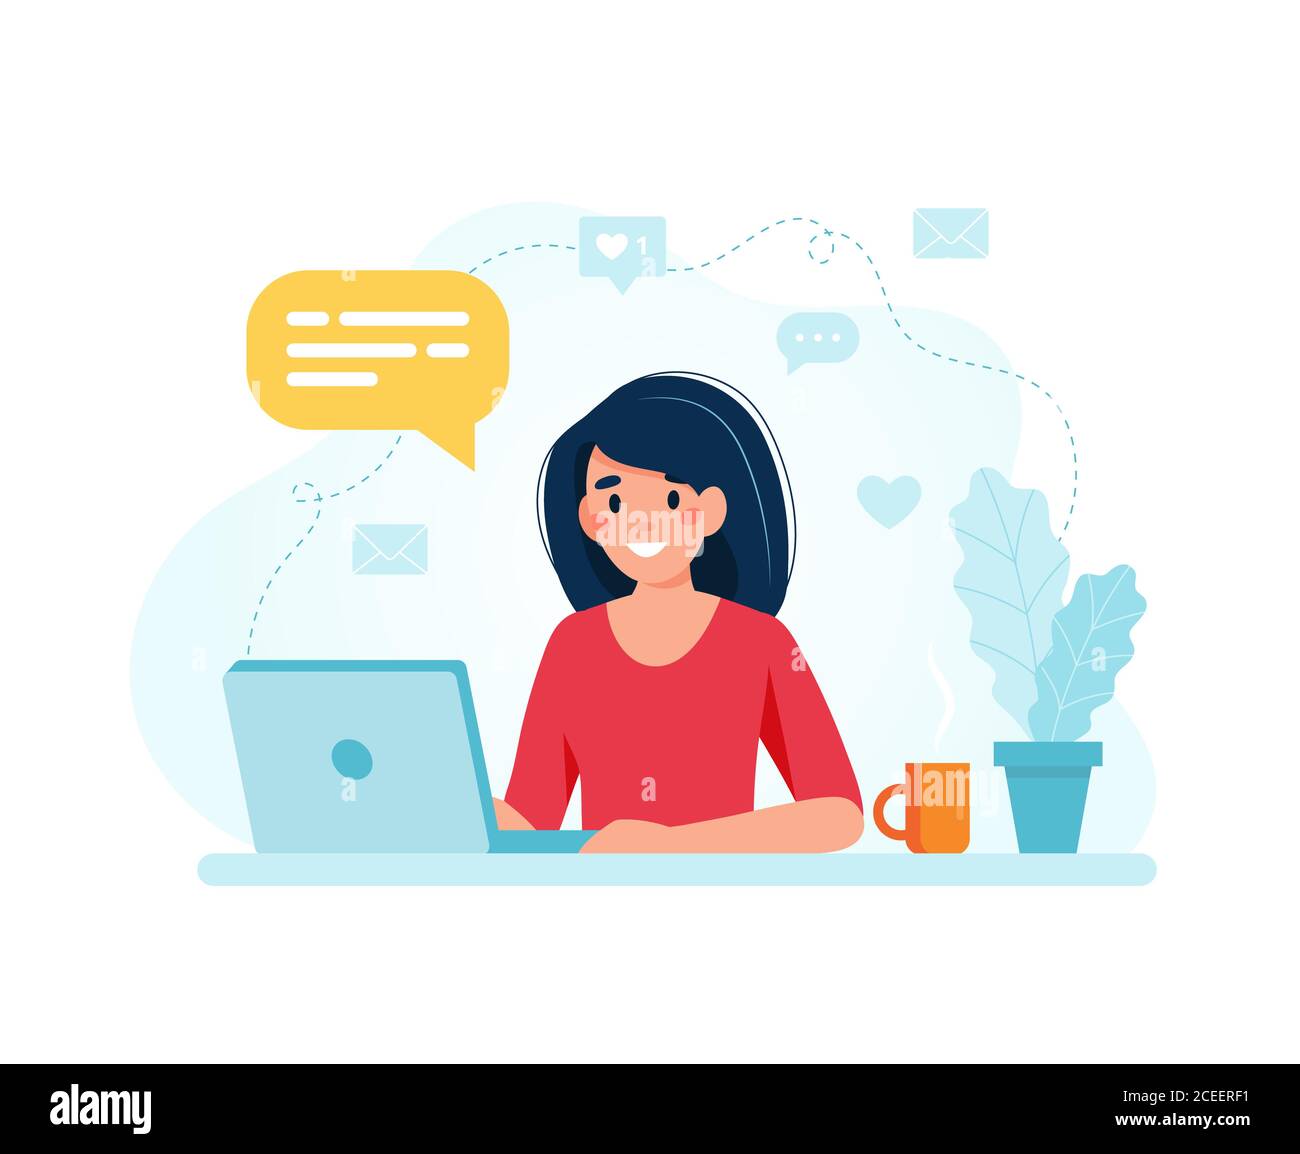 Online marketing specialist. Female character working with laptop. illustration in flat style Stock Photo